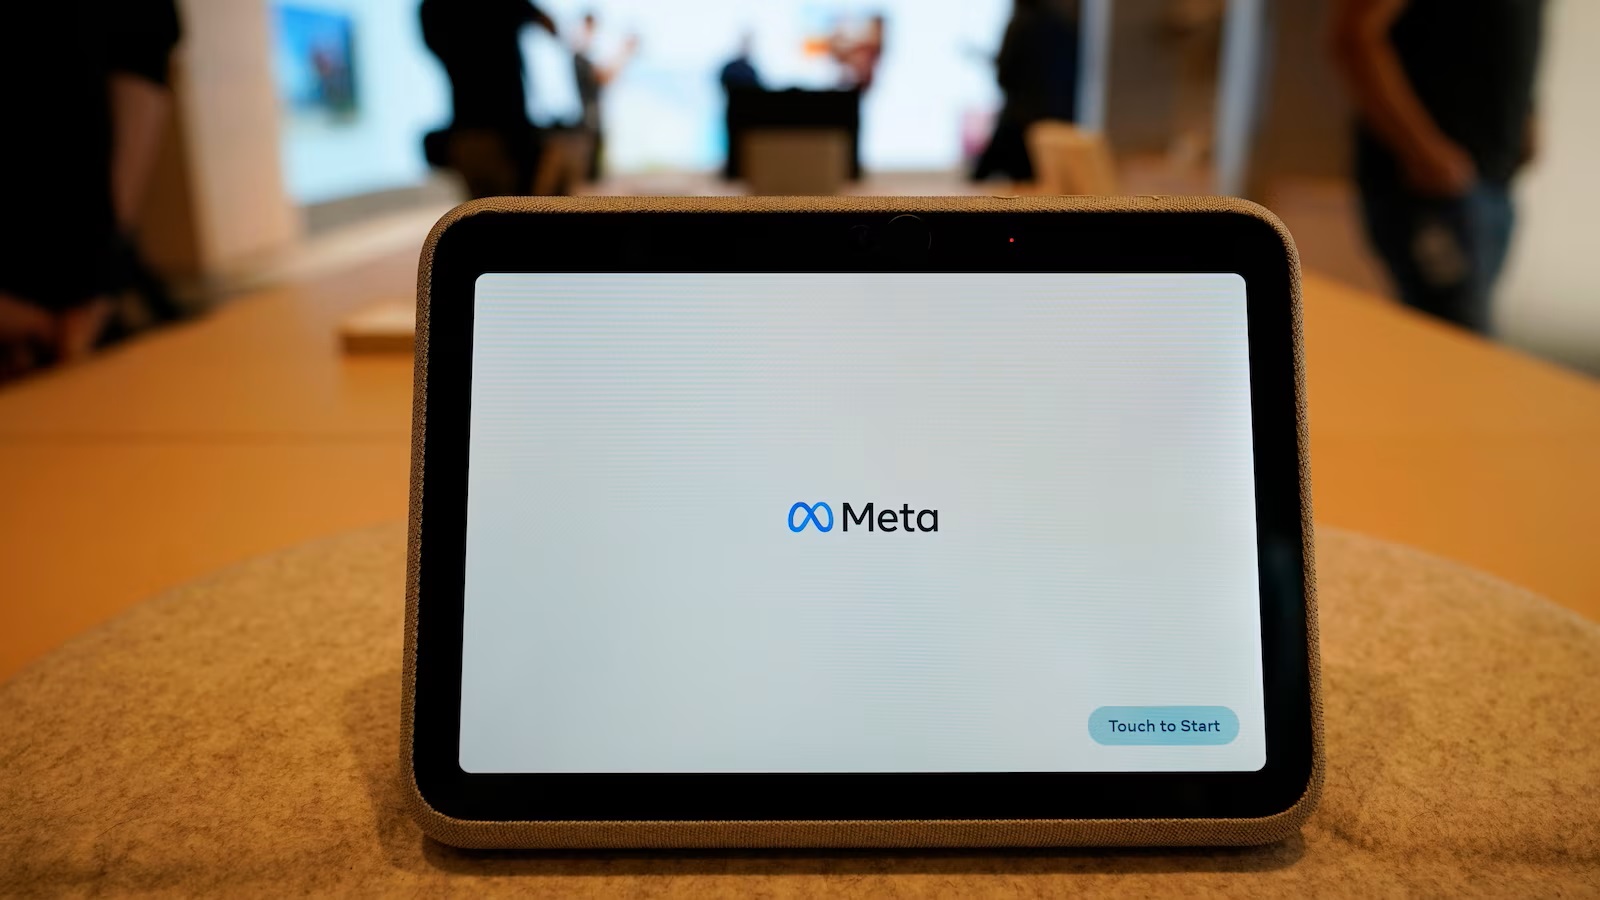 Meta posts sharp profit, revenue increase in Q4 thanks to cost cuts and advertising rebound